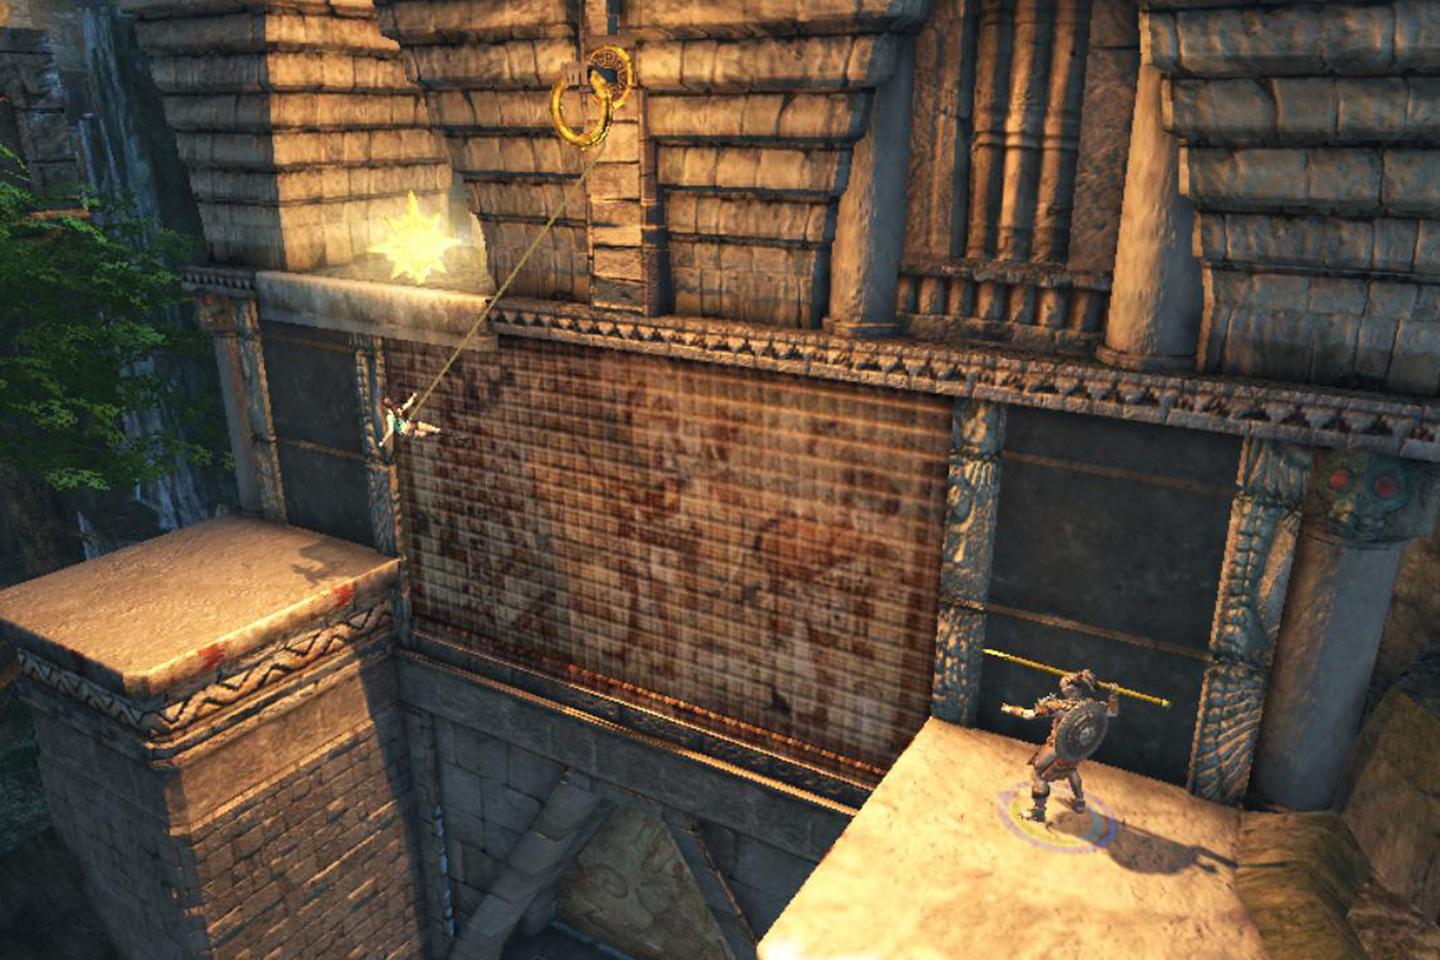 Lara Croft grappling across a gap between ancient buildings, with sunlight casting dramatic shadows, in a classic puzzle-platforming moment from a Tomb Raider game.